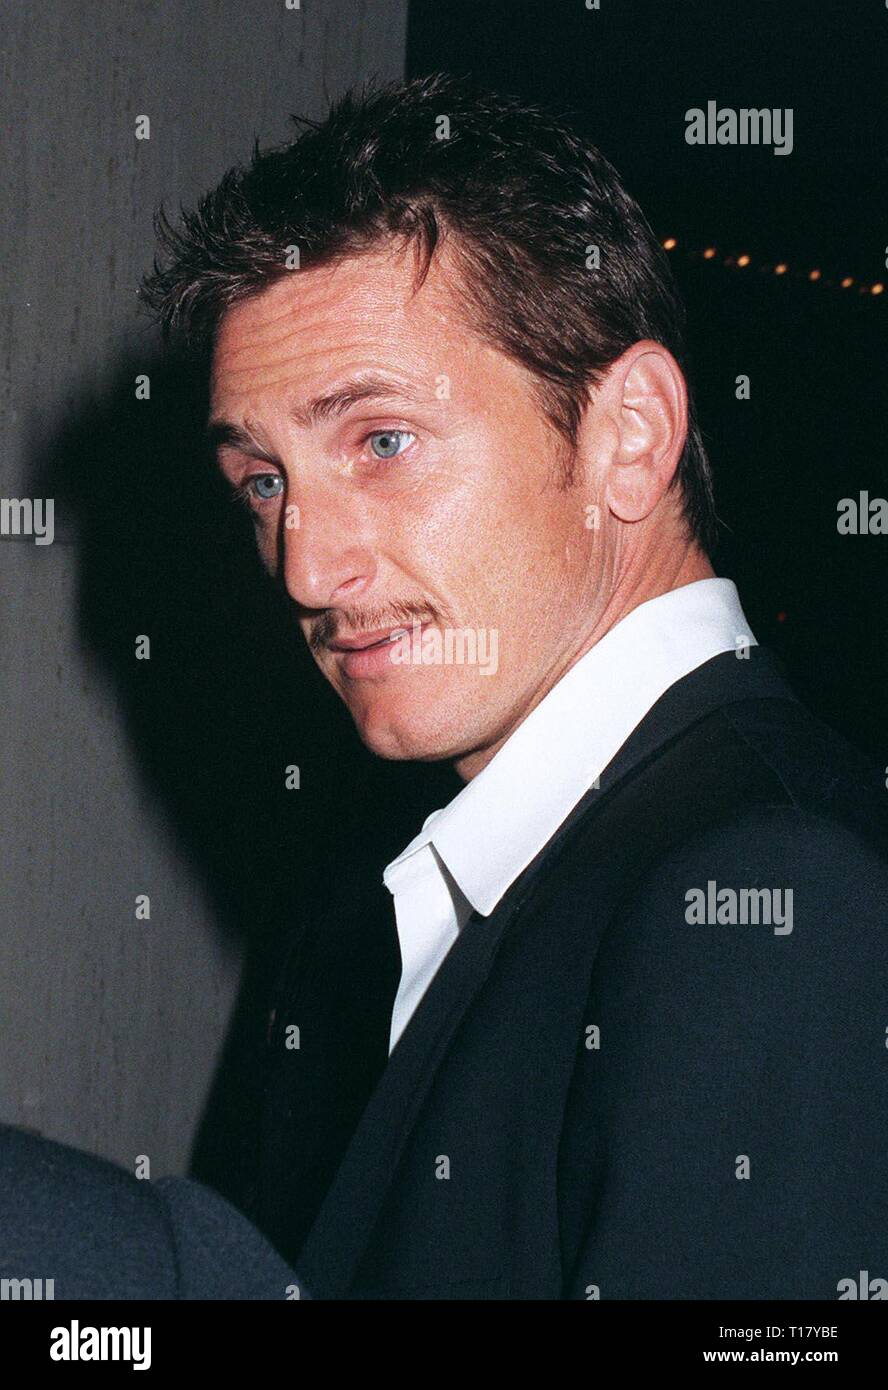 LOS ANGELES, CA. October 28, 1997:   Actor Sean Penn at the premiere in Los Angeles of 'Mad City' which stars John Travolta & Dustin Hoffman. Stock Photo